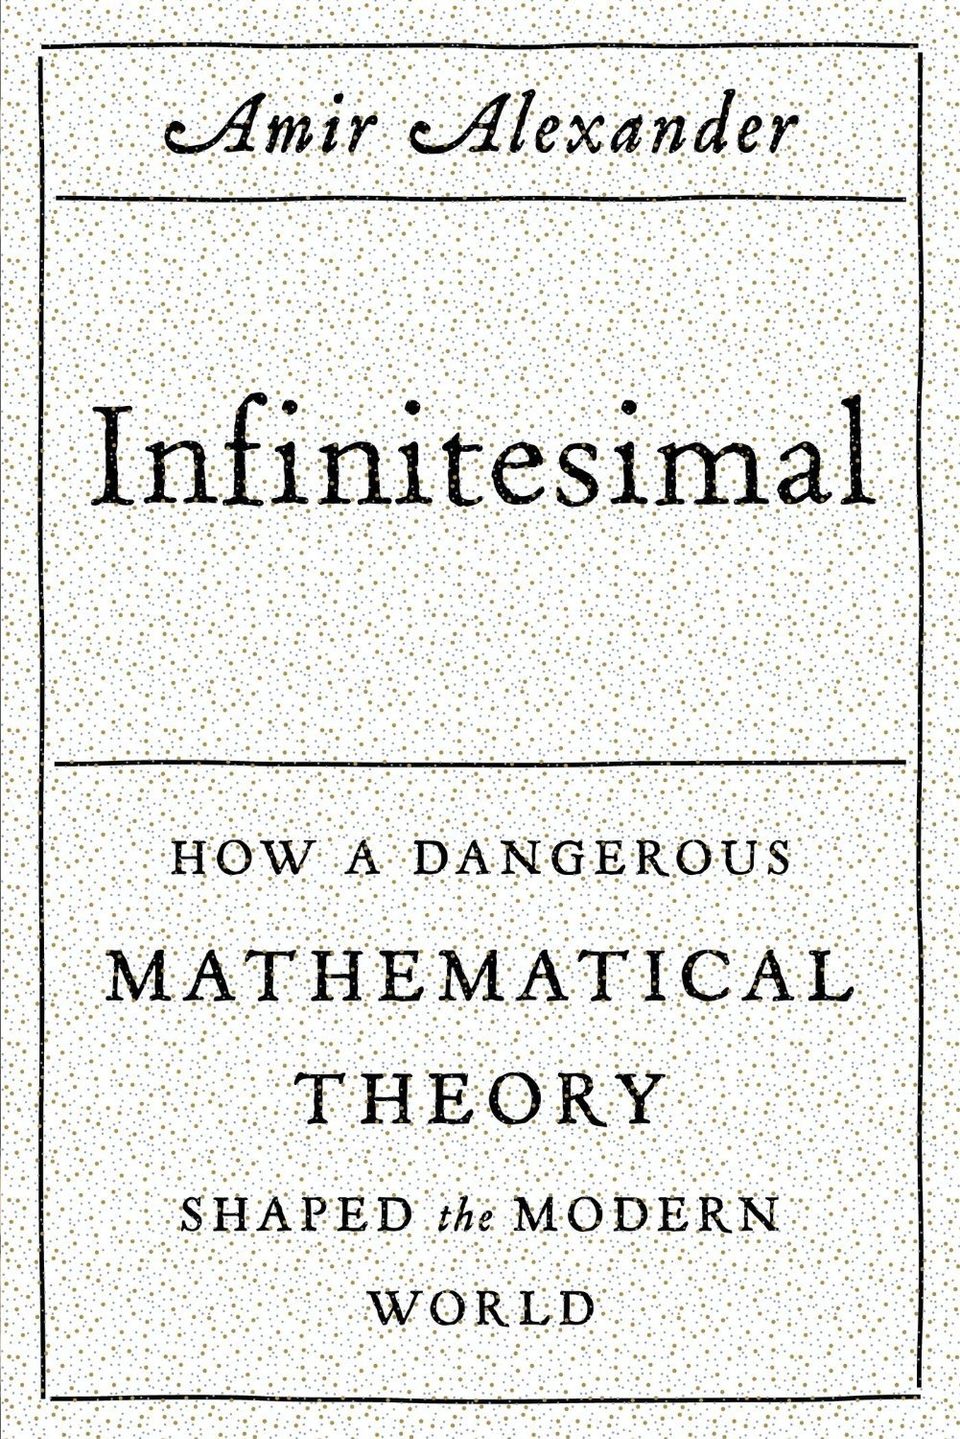 'Infinitesimal: How a Dangerous Mathematical Theory Shaped the Modern World' by Amir Alexander (FSG/Scientific American) 